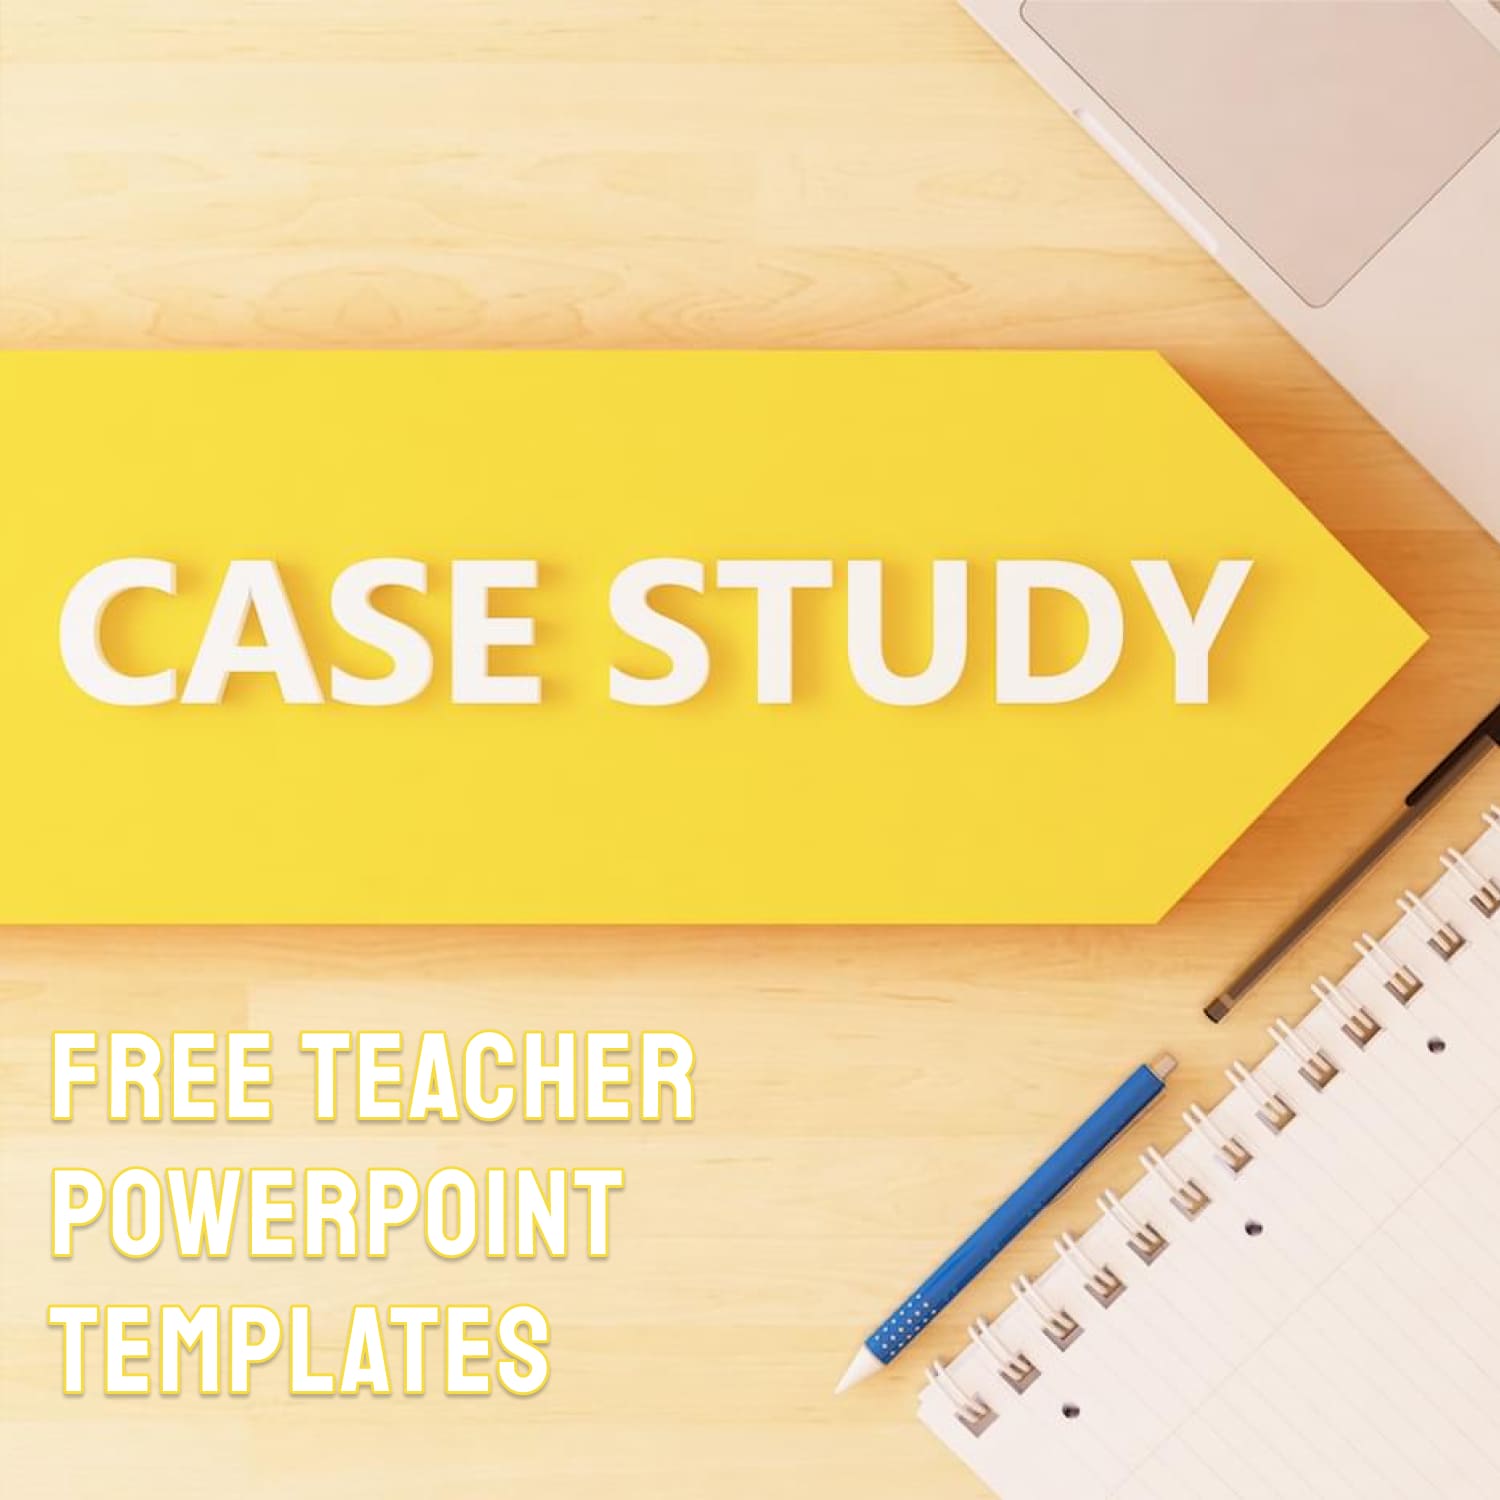 Case Study Powerpoint Template Free 1500 1.